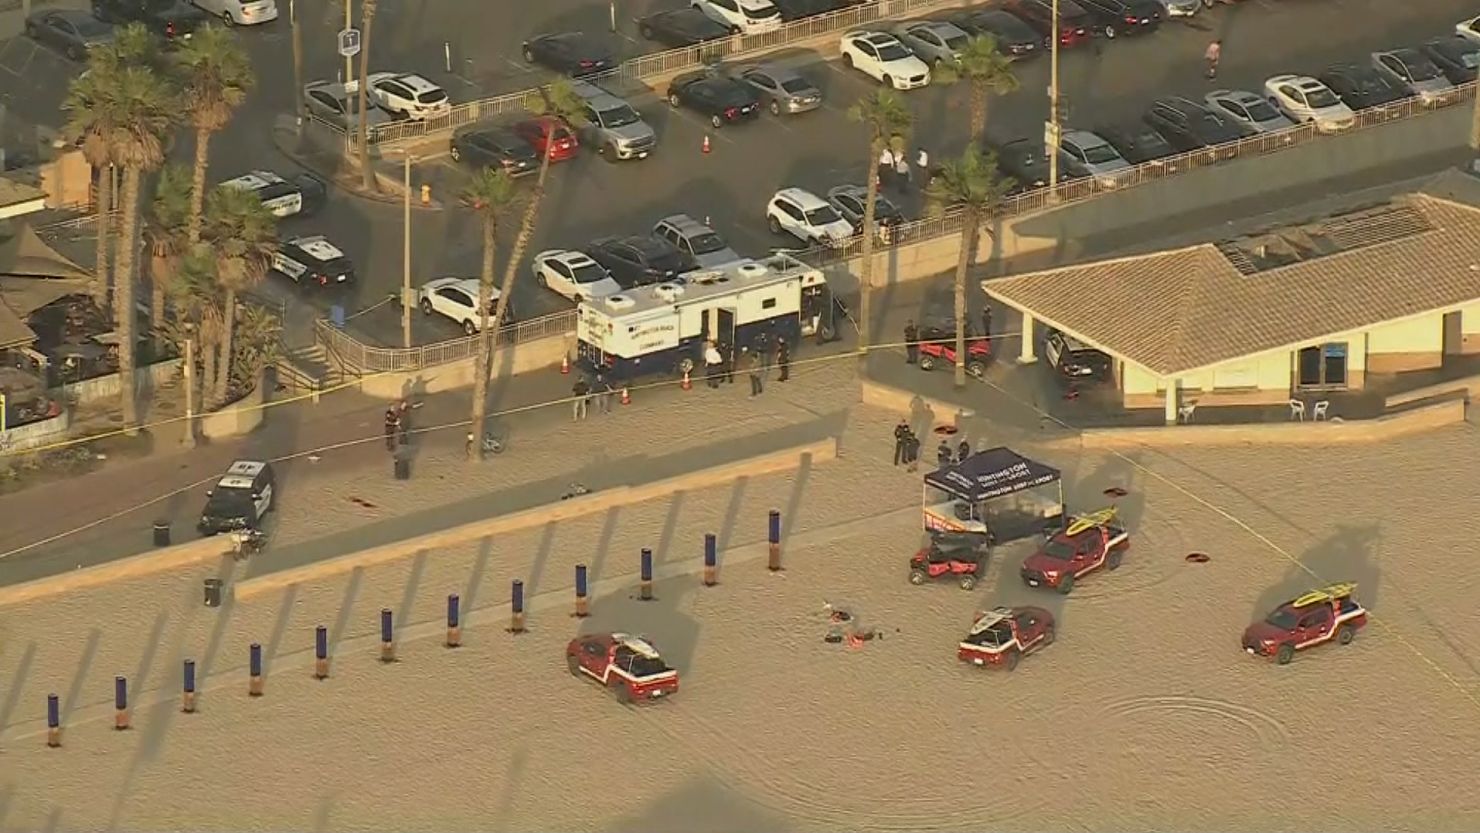 The scene of an officer-involved shooting in Huntington Beach, California.